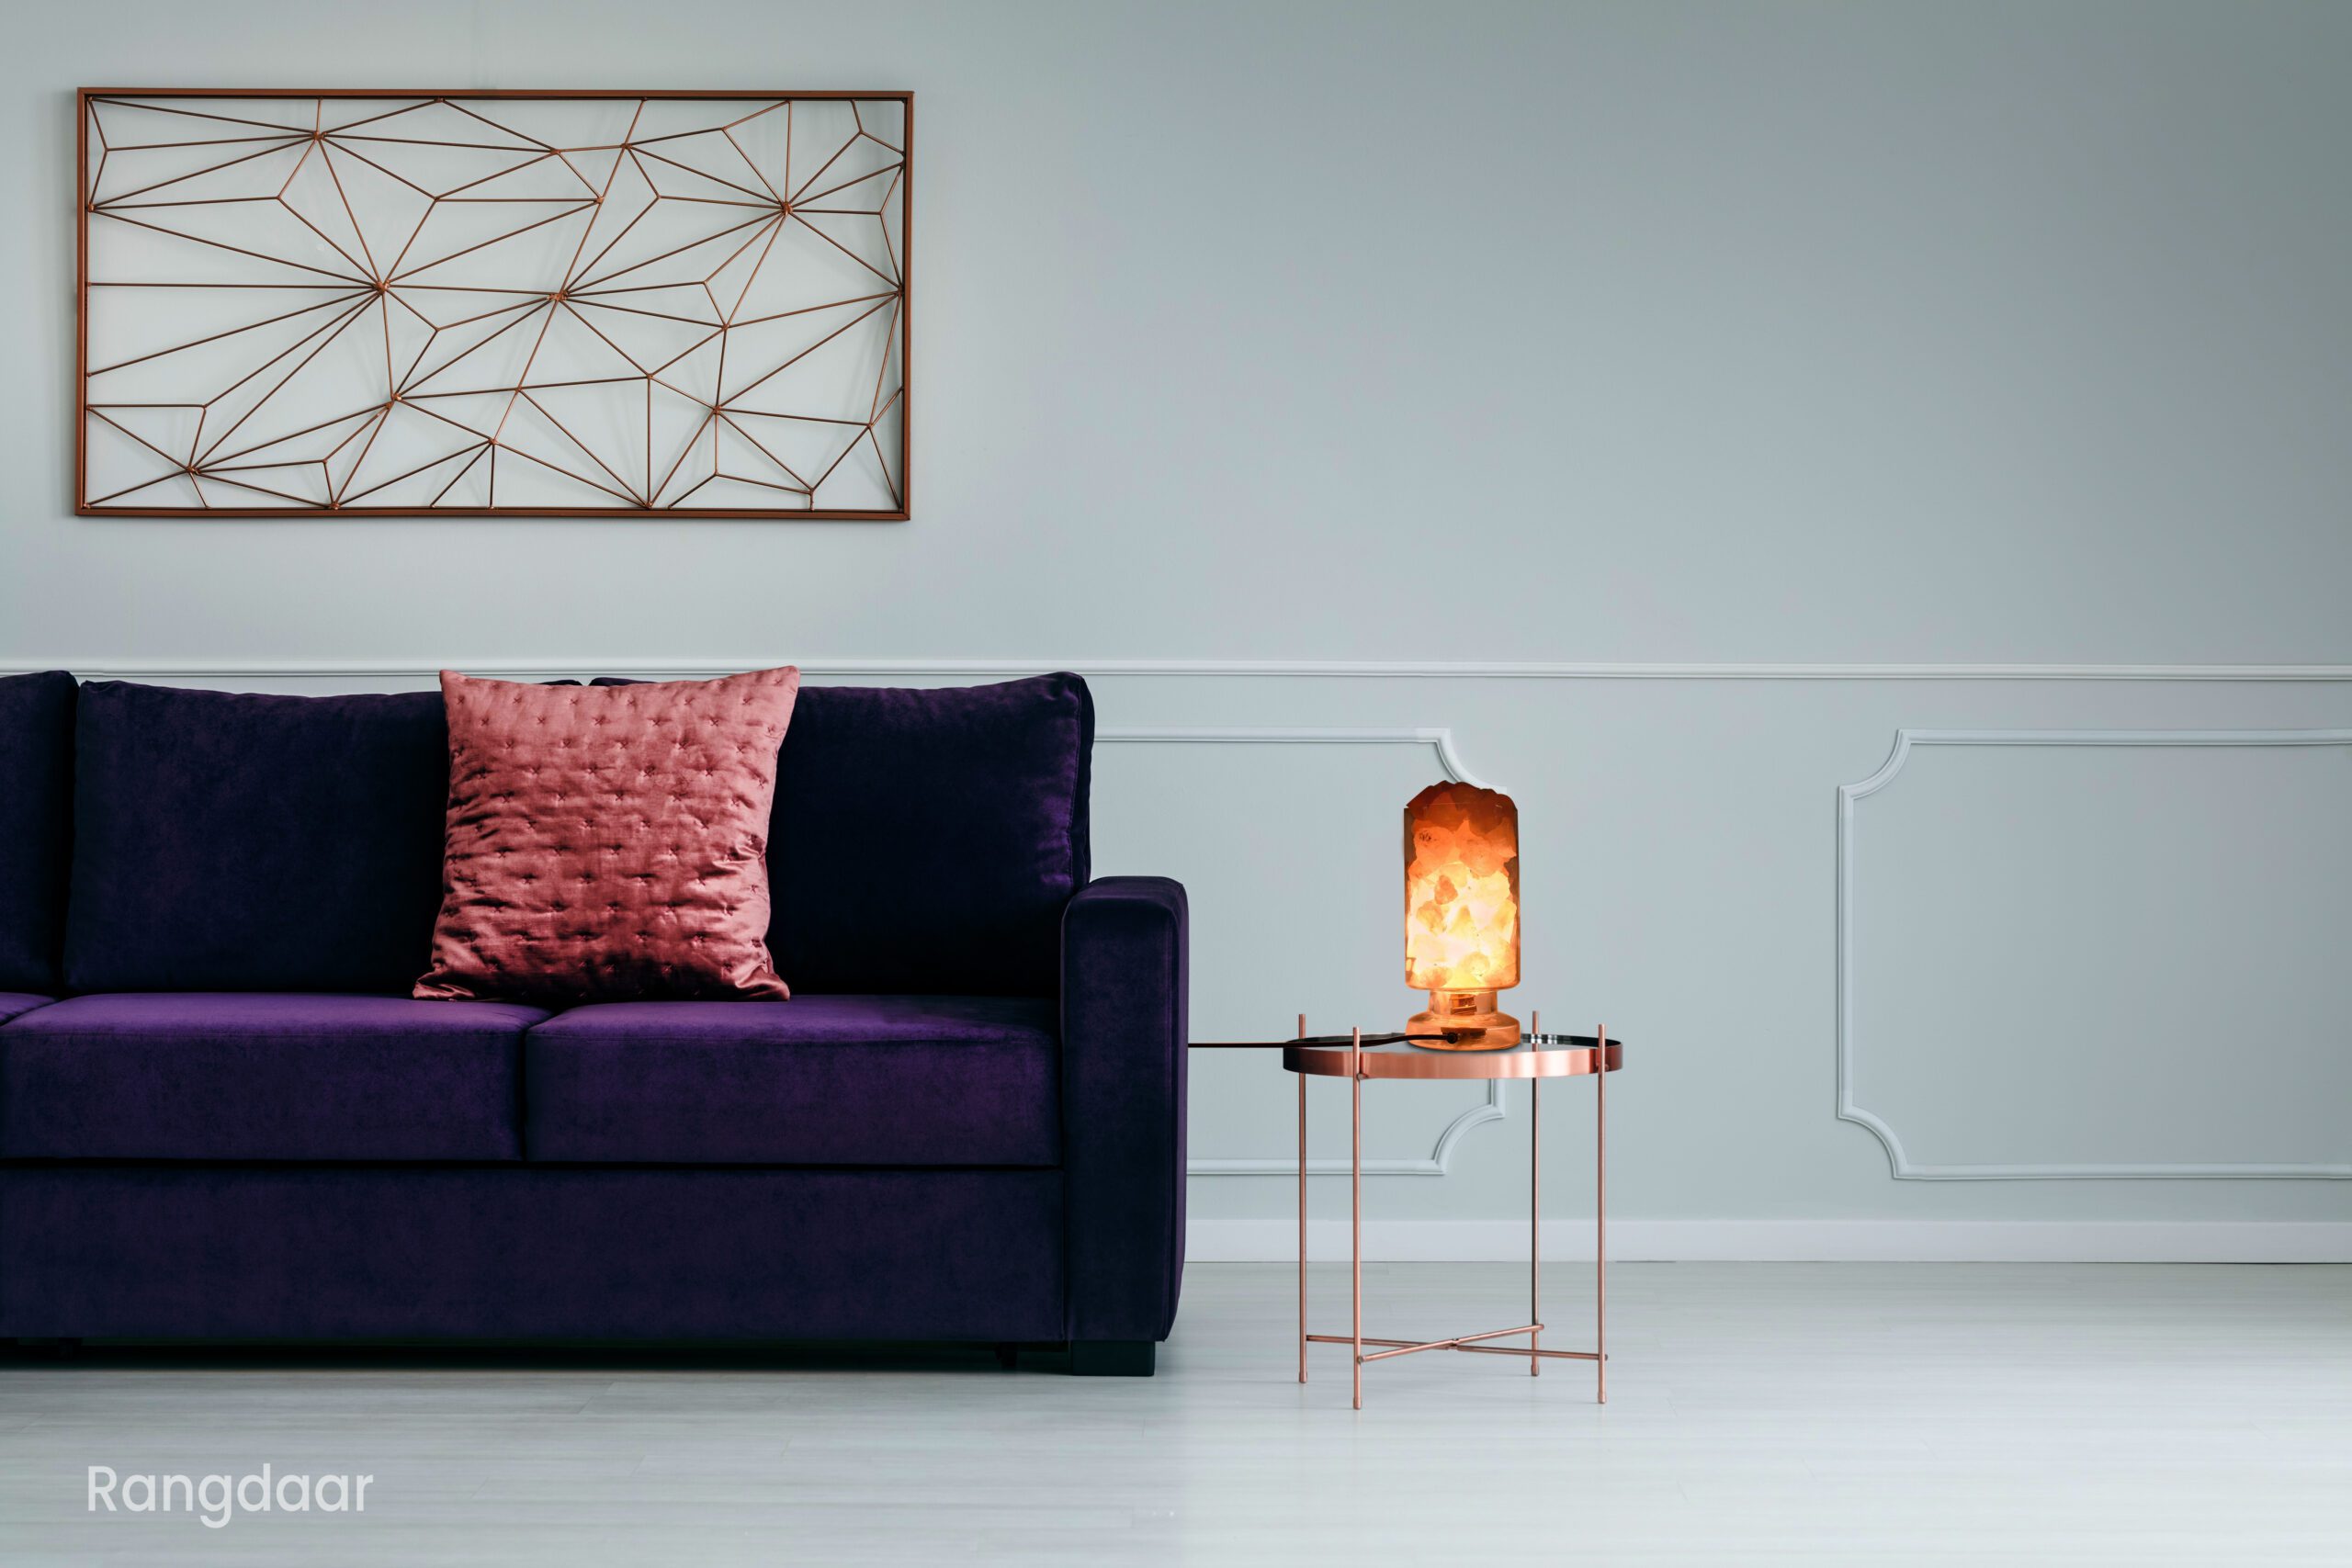 Ultra violet sofa and metal side table in empty living room interior